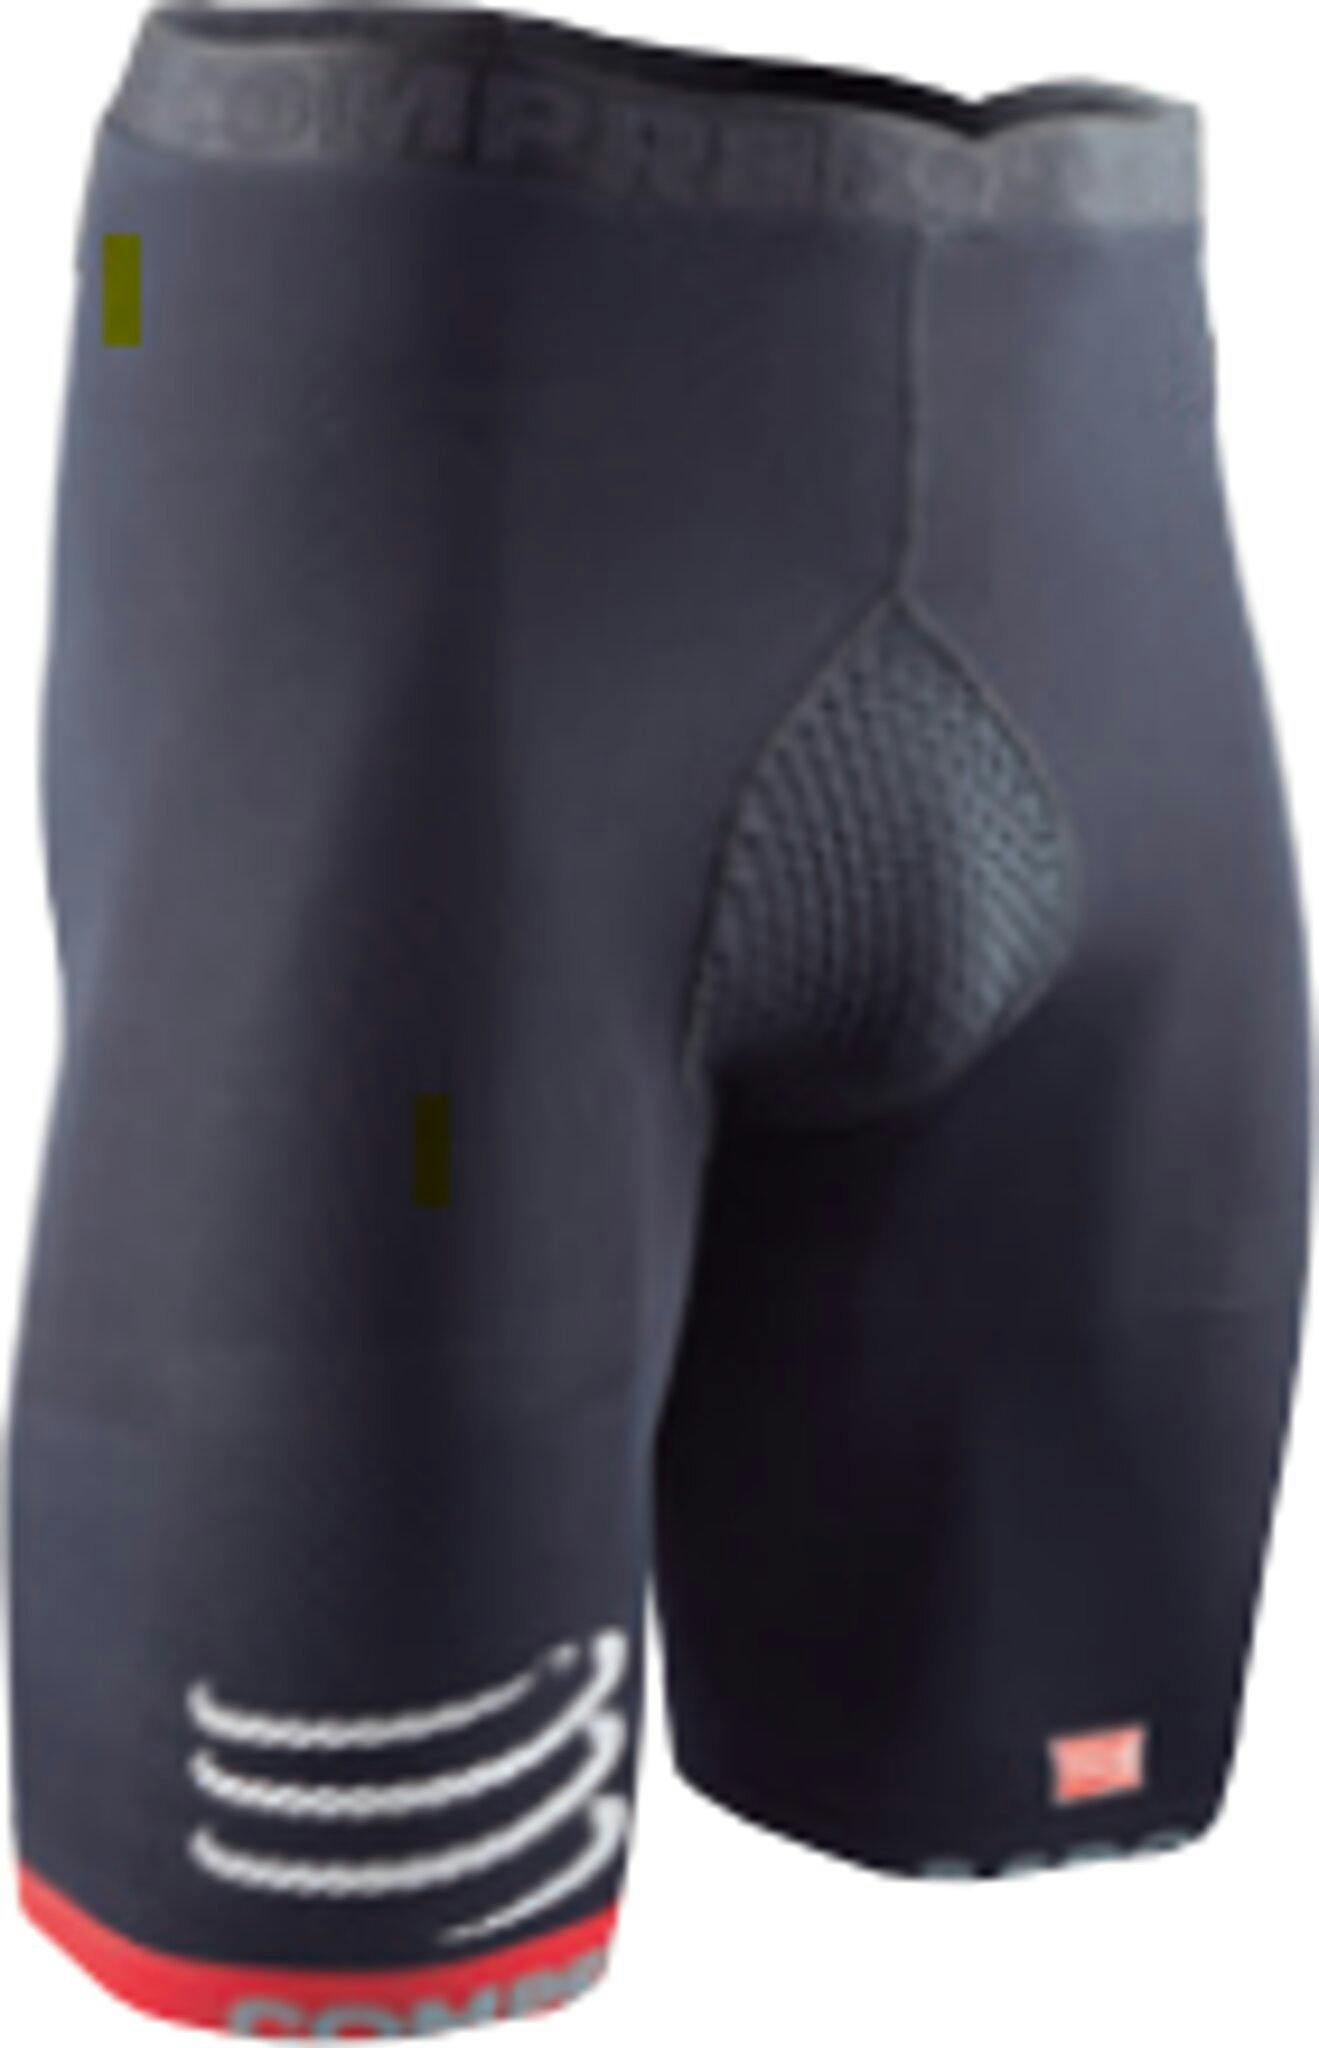 Product image for Ventilated Multisport Compression Shorts - Men's